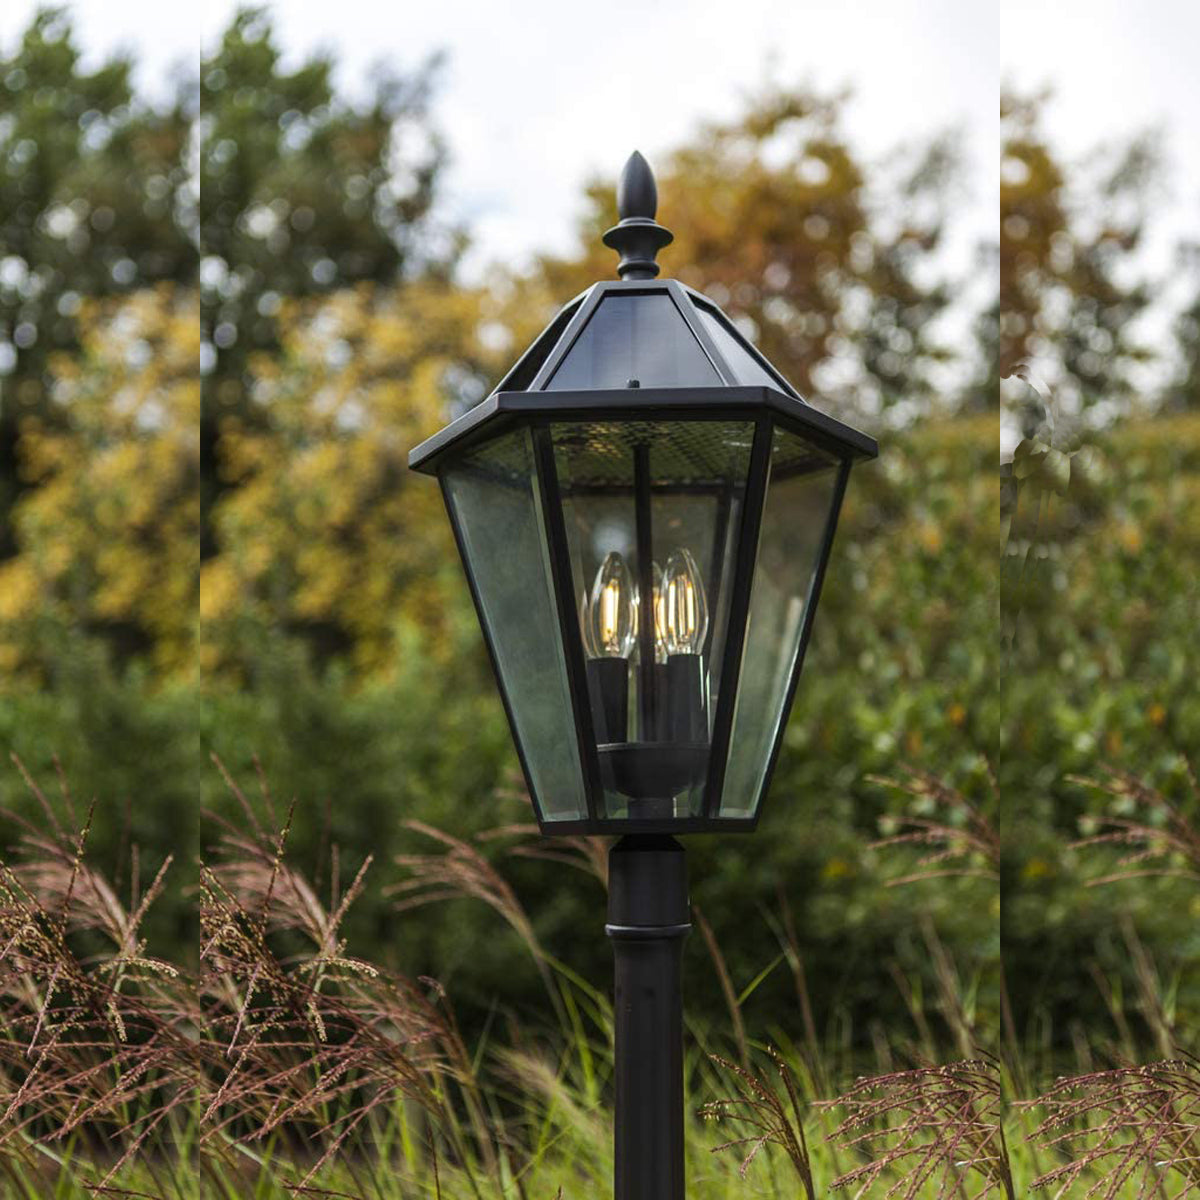 Our London 2.3 metre post combines traditional-design with modern durability for a garden light that won't let you down. Made with high quality robust die cast aluminium in a black finish, with clear glass panes, it will add a beautiful look to your outside spaces. Use it to illuminate front or back gardens, for warm and ambient lighting that welcomes you home, whatever the weather